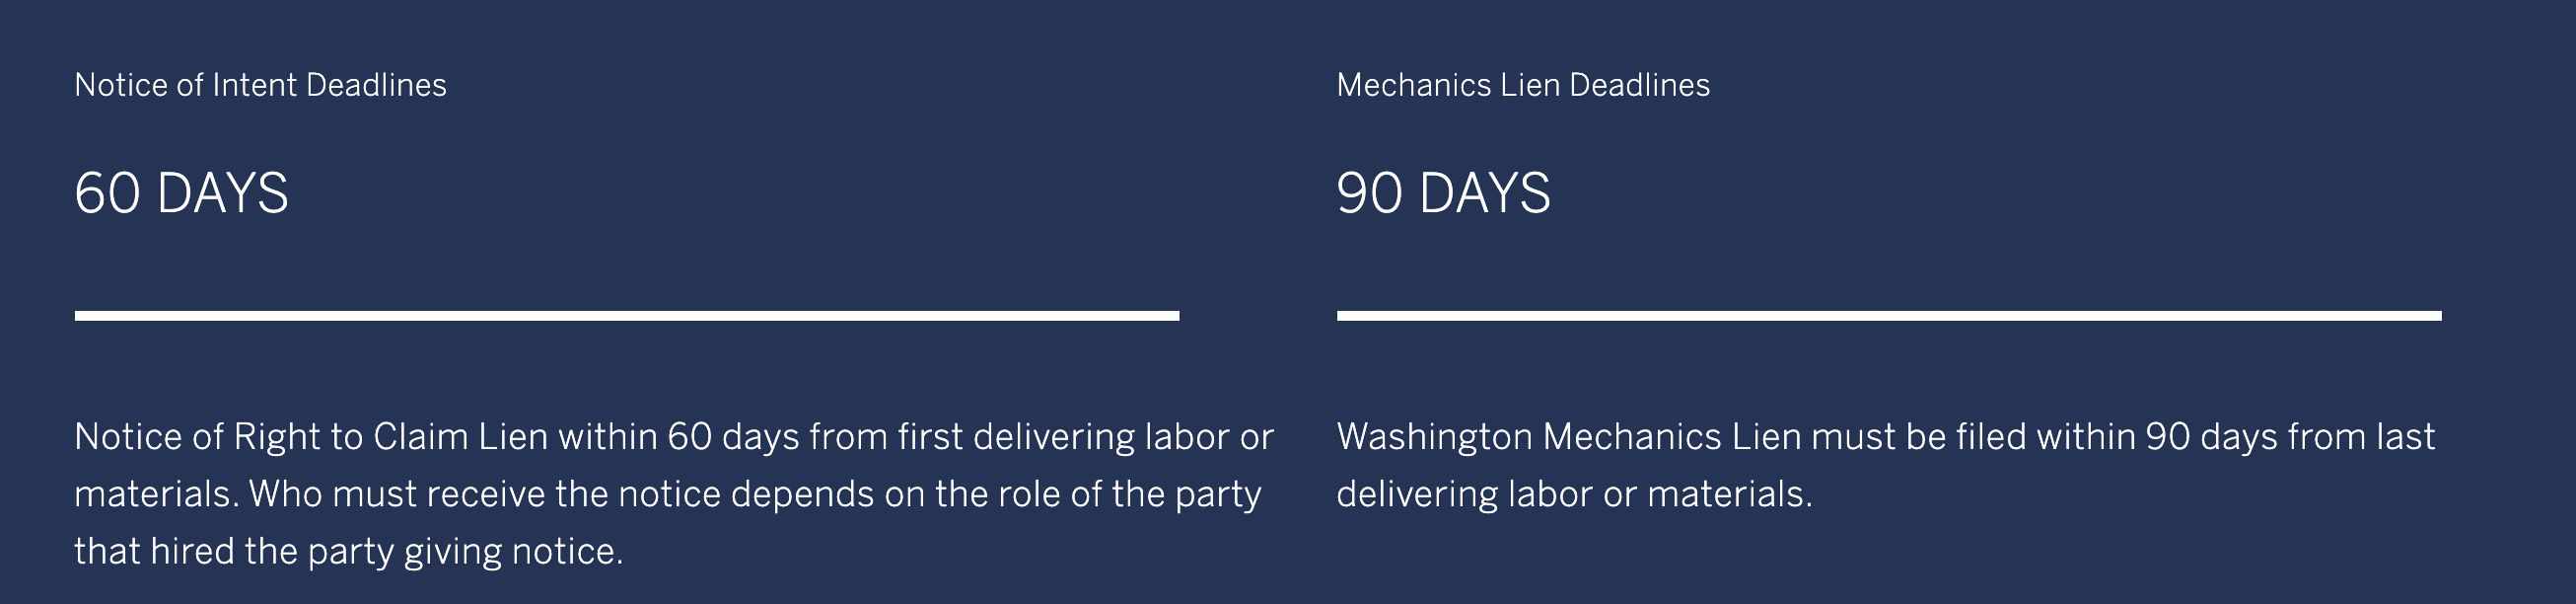 Washington lien and Notice of Intent deadlines for suppliers